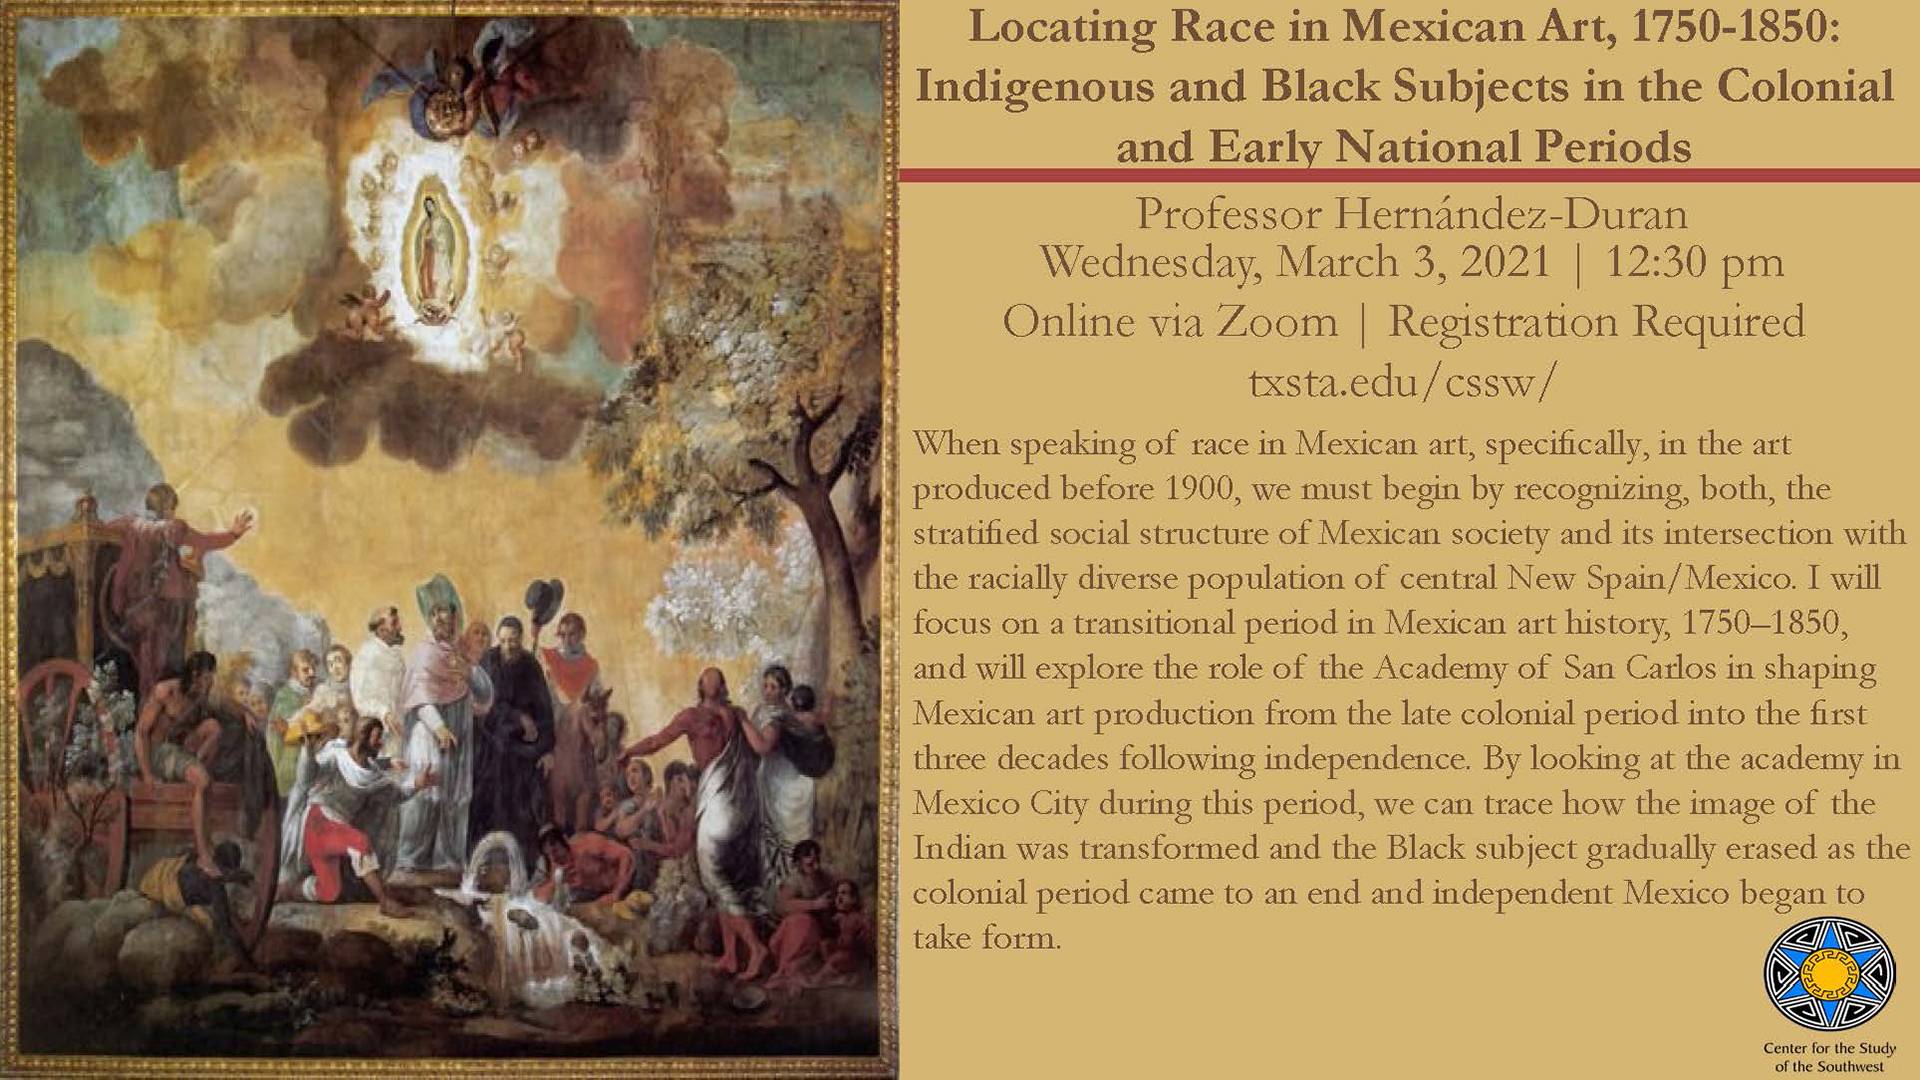 Locating Race in Mexican Art, 1750-1850